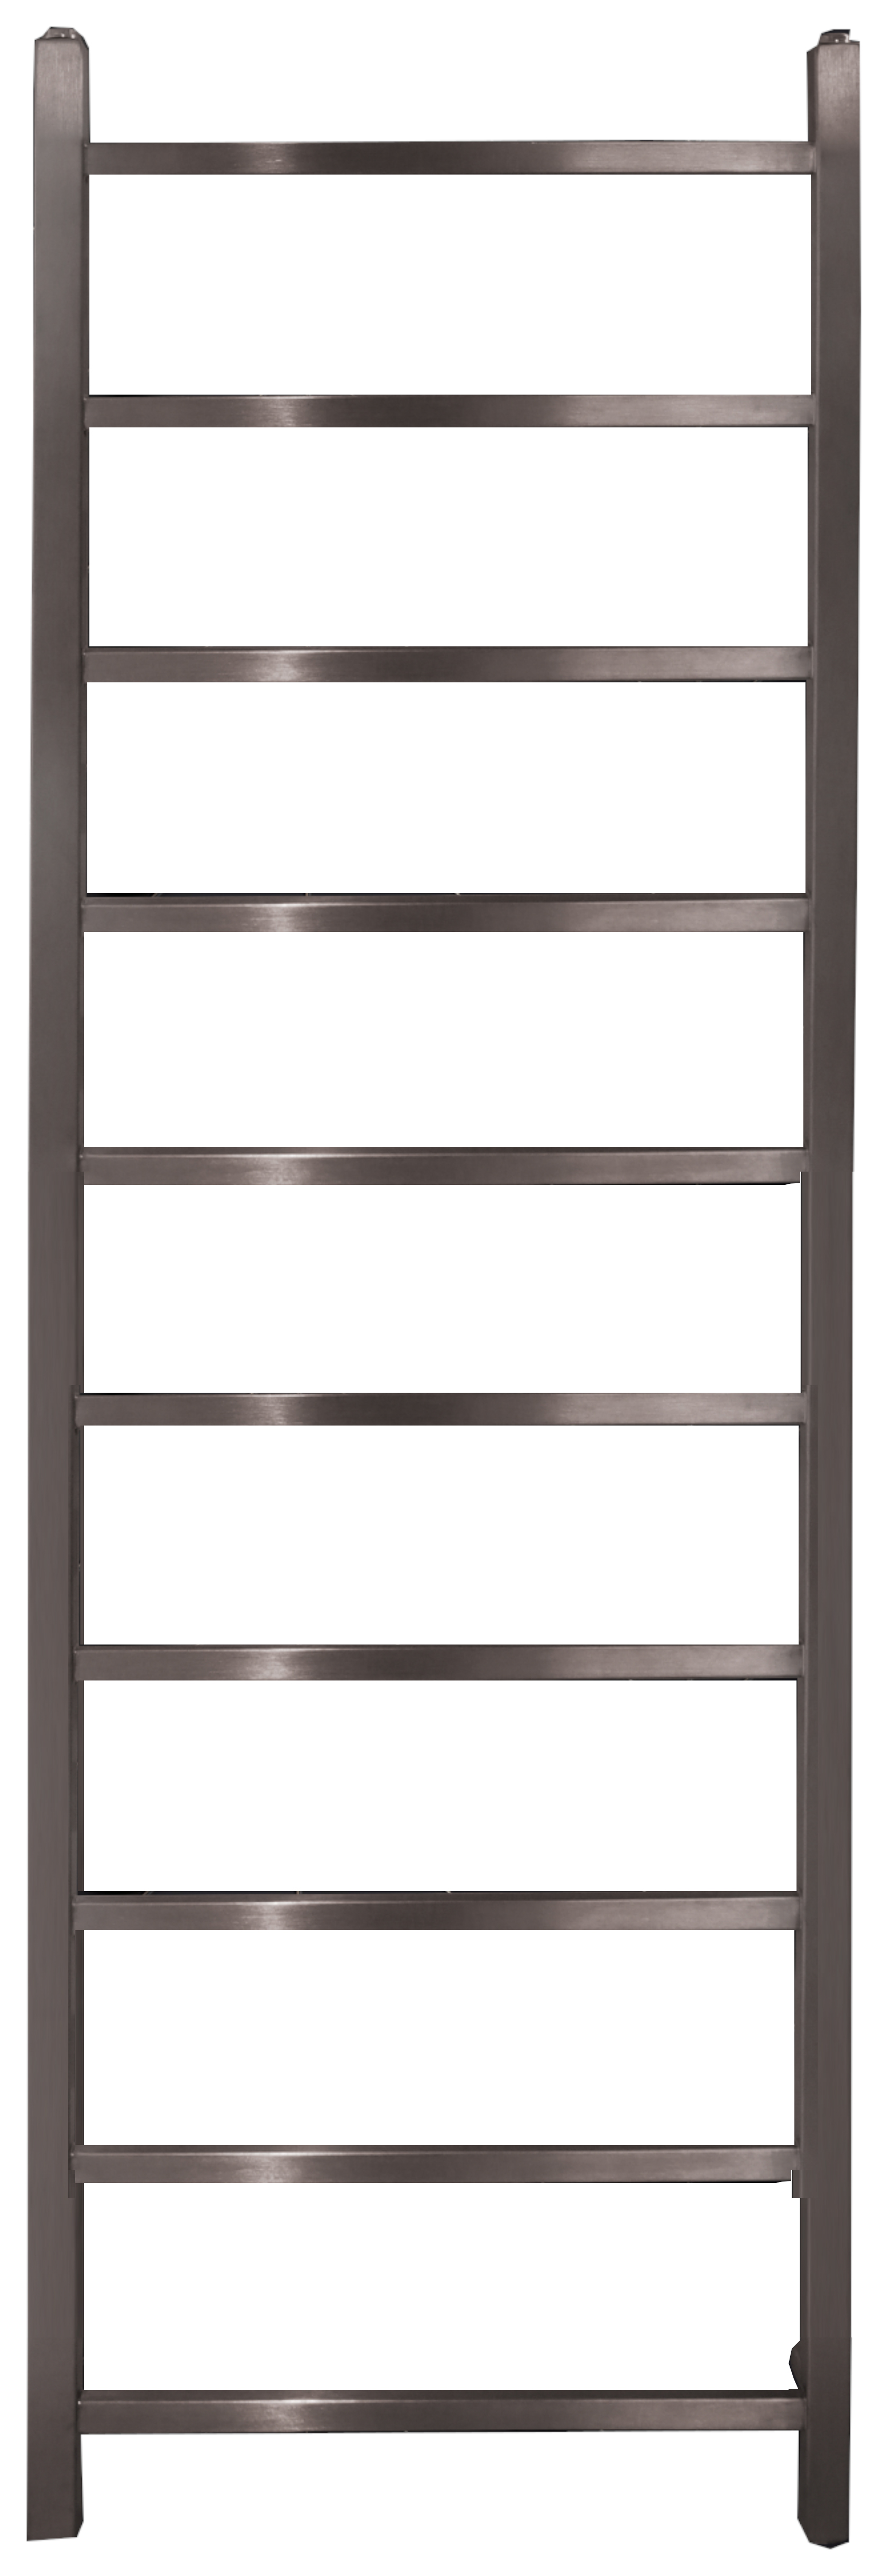 Image of Towelrads Diva Brushed Stainless Steel Dry Electric Non Thermostatic Towel Radiator - 1500 x 500mm